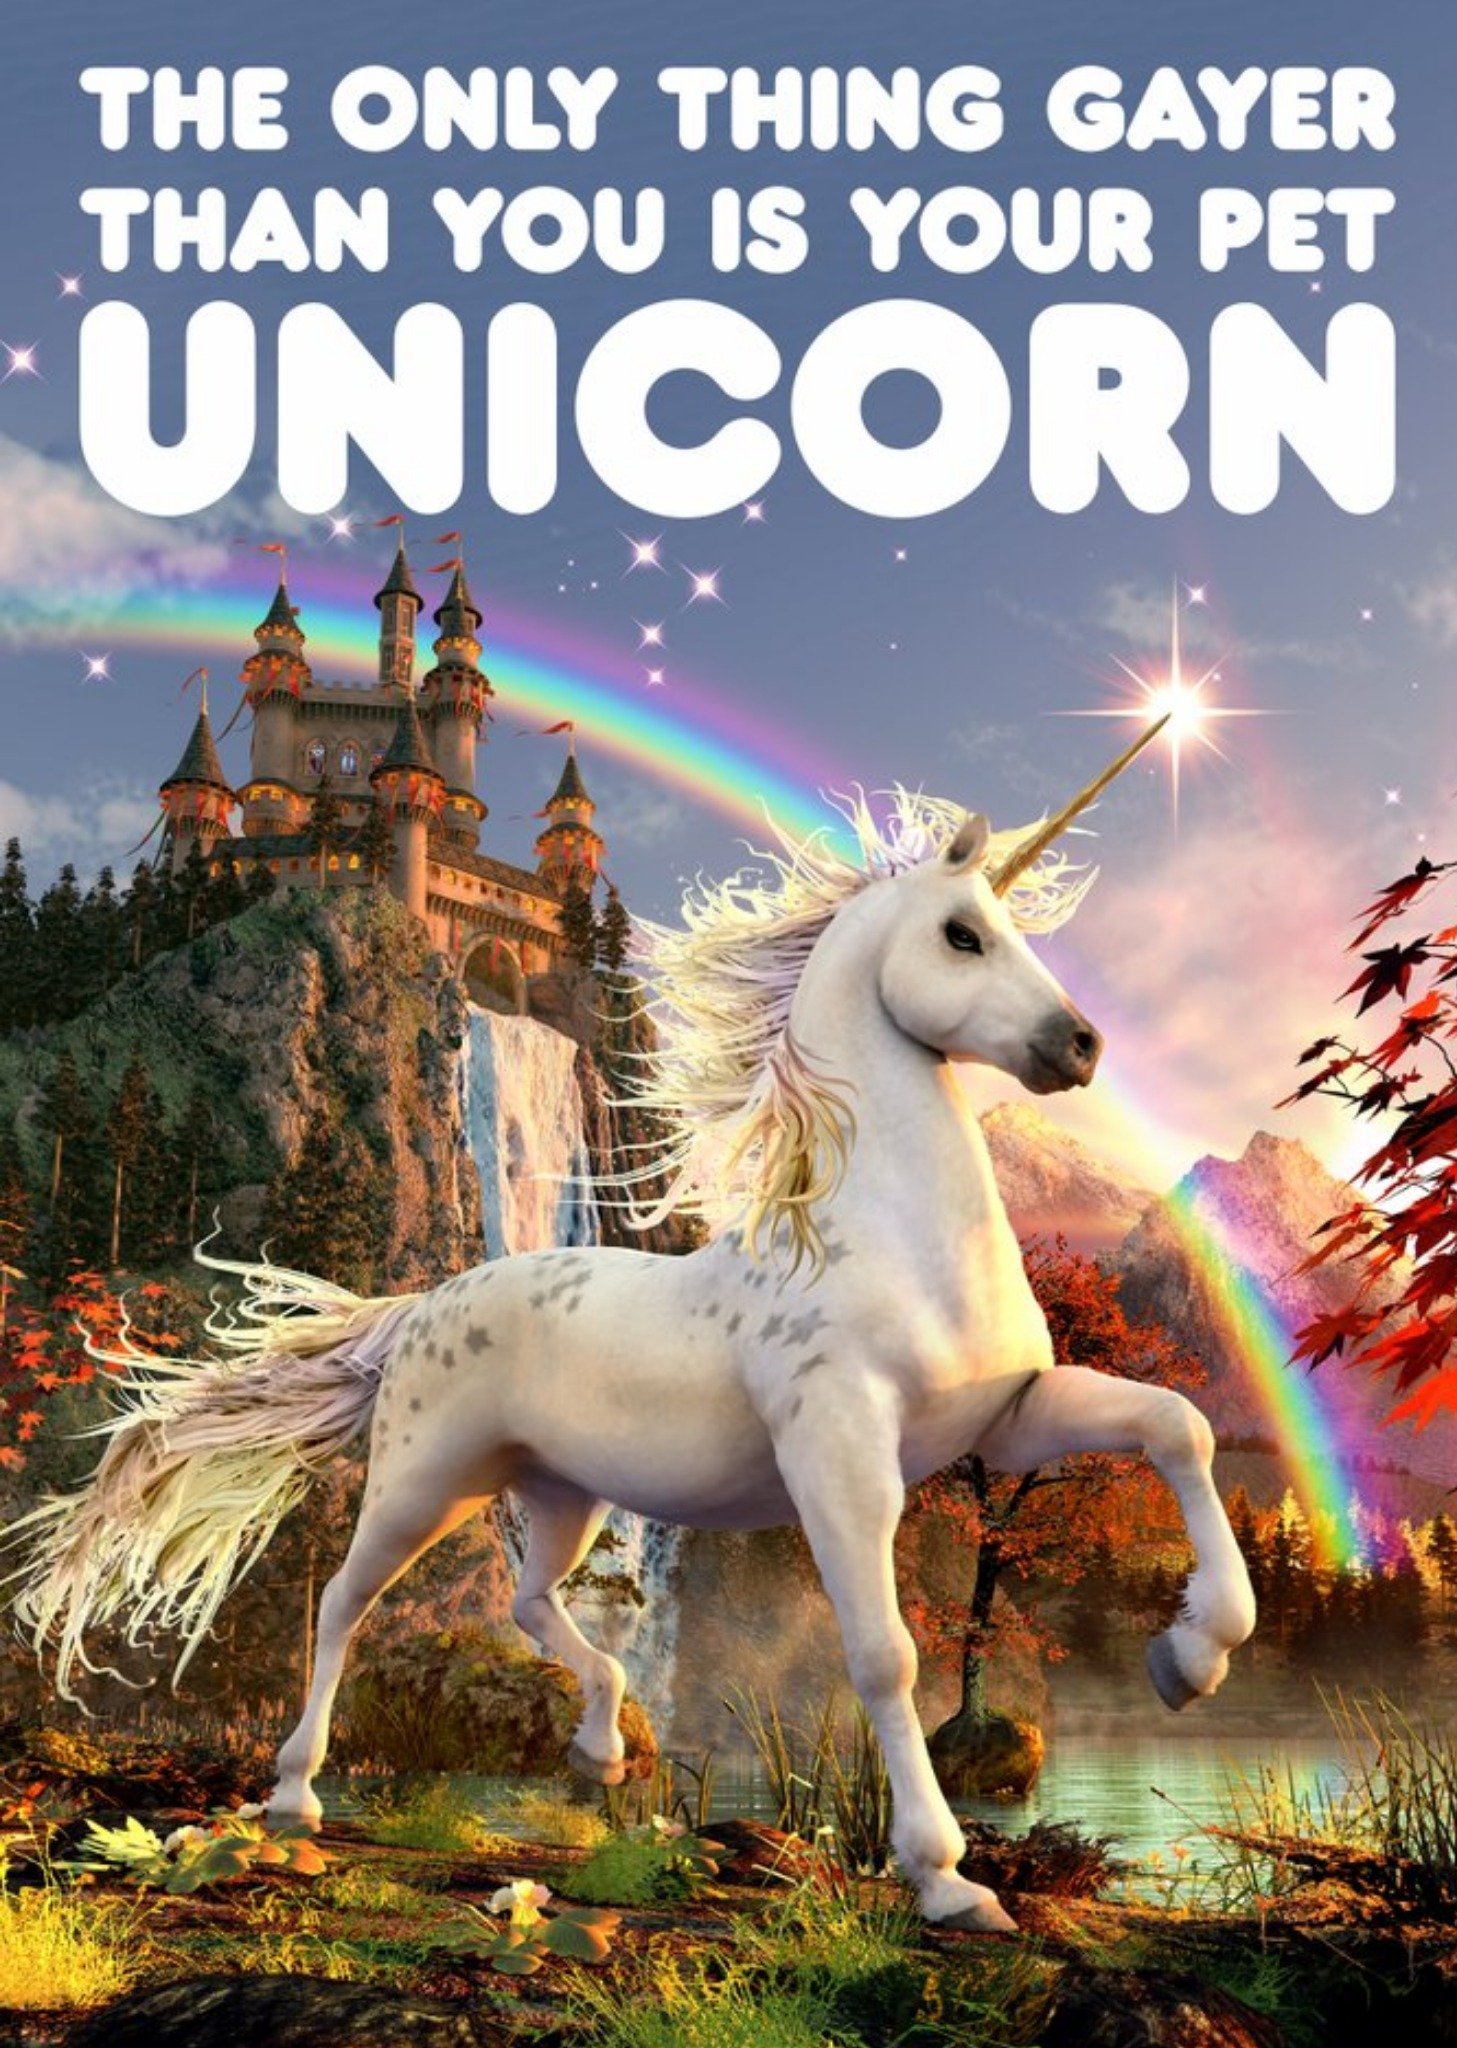 Moonpig Dean Morris The Only Thing Gayer Than You Is Your Pet Unicorn Birthday Card Ecard